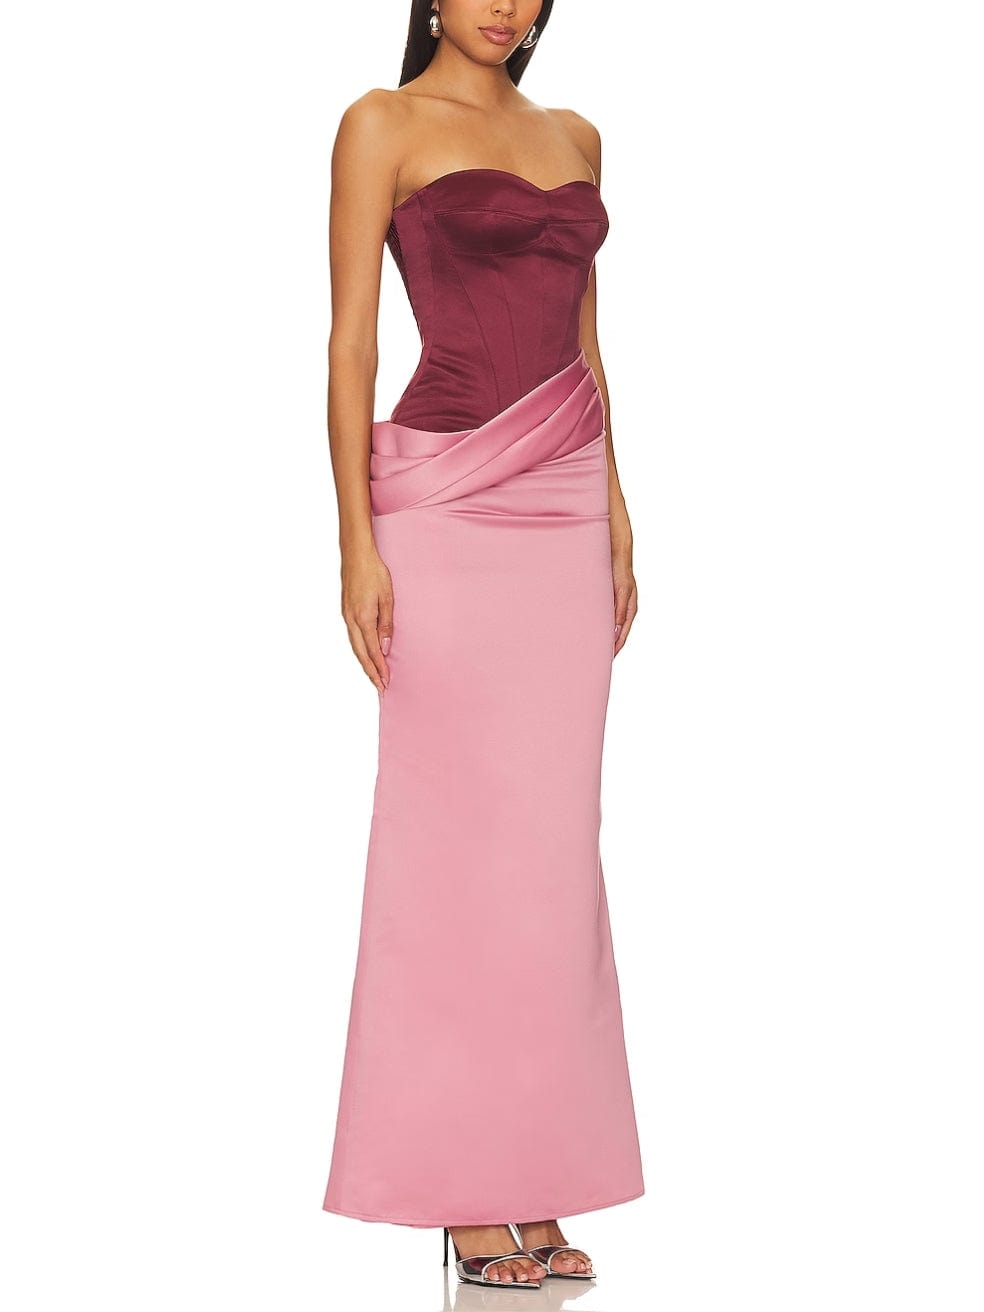 The Two-Tone Undressed Gown in Wine and Rose